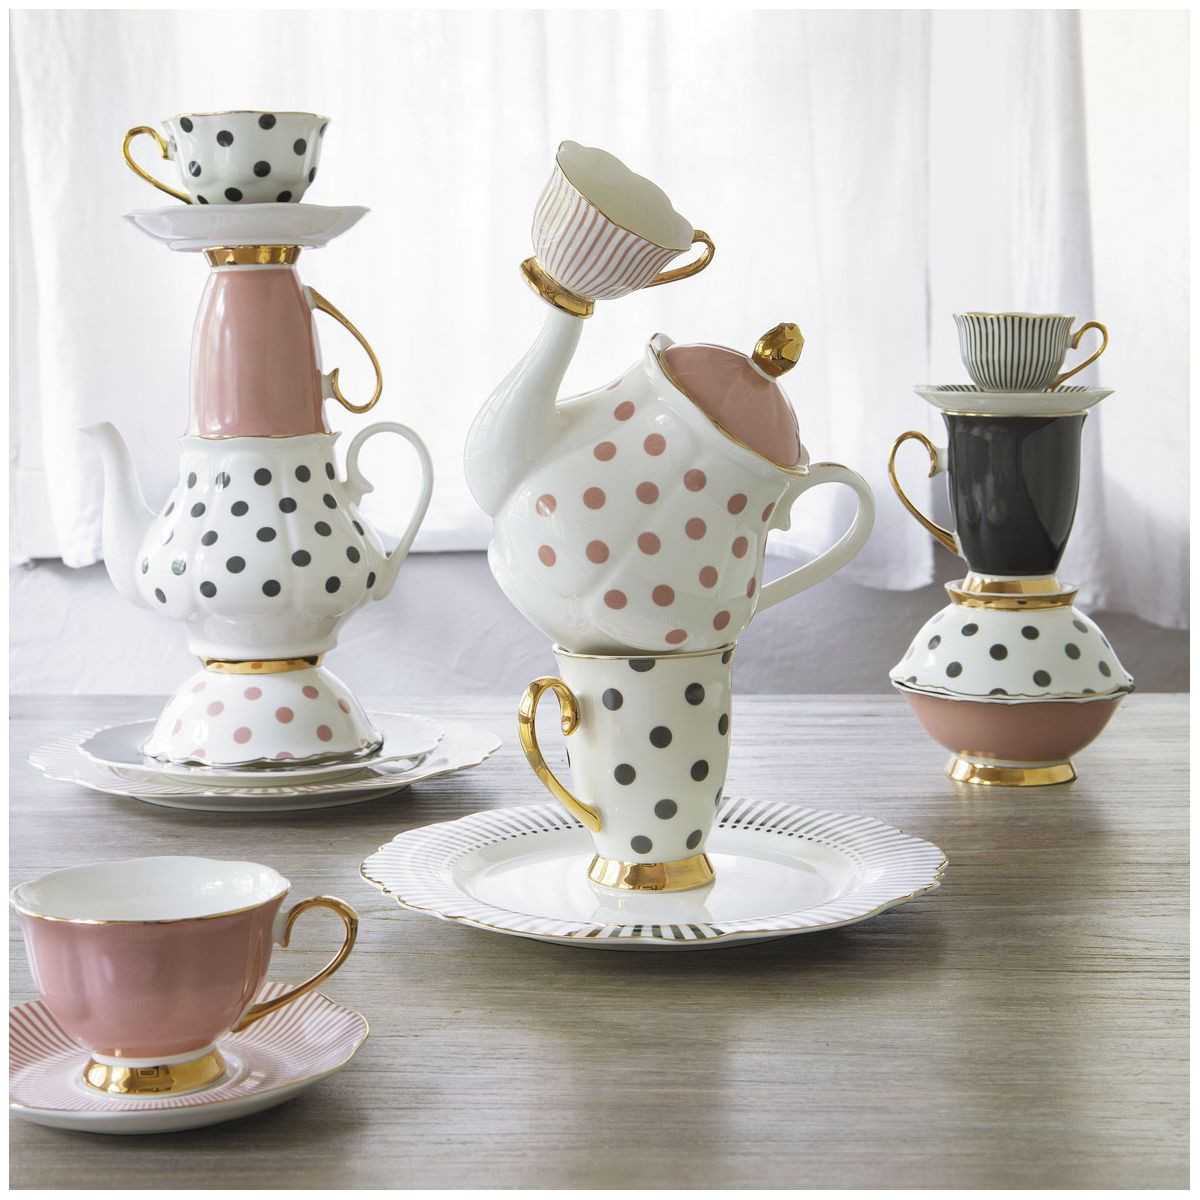 Cups and teapots